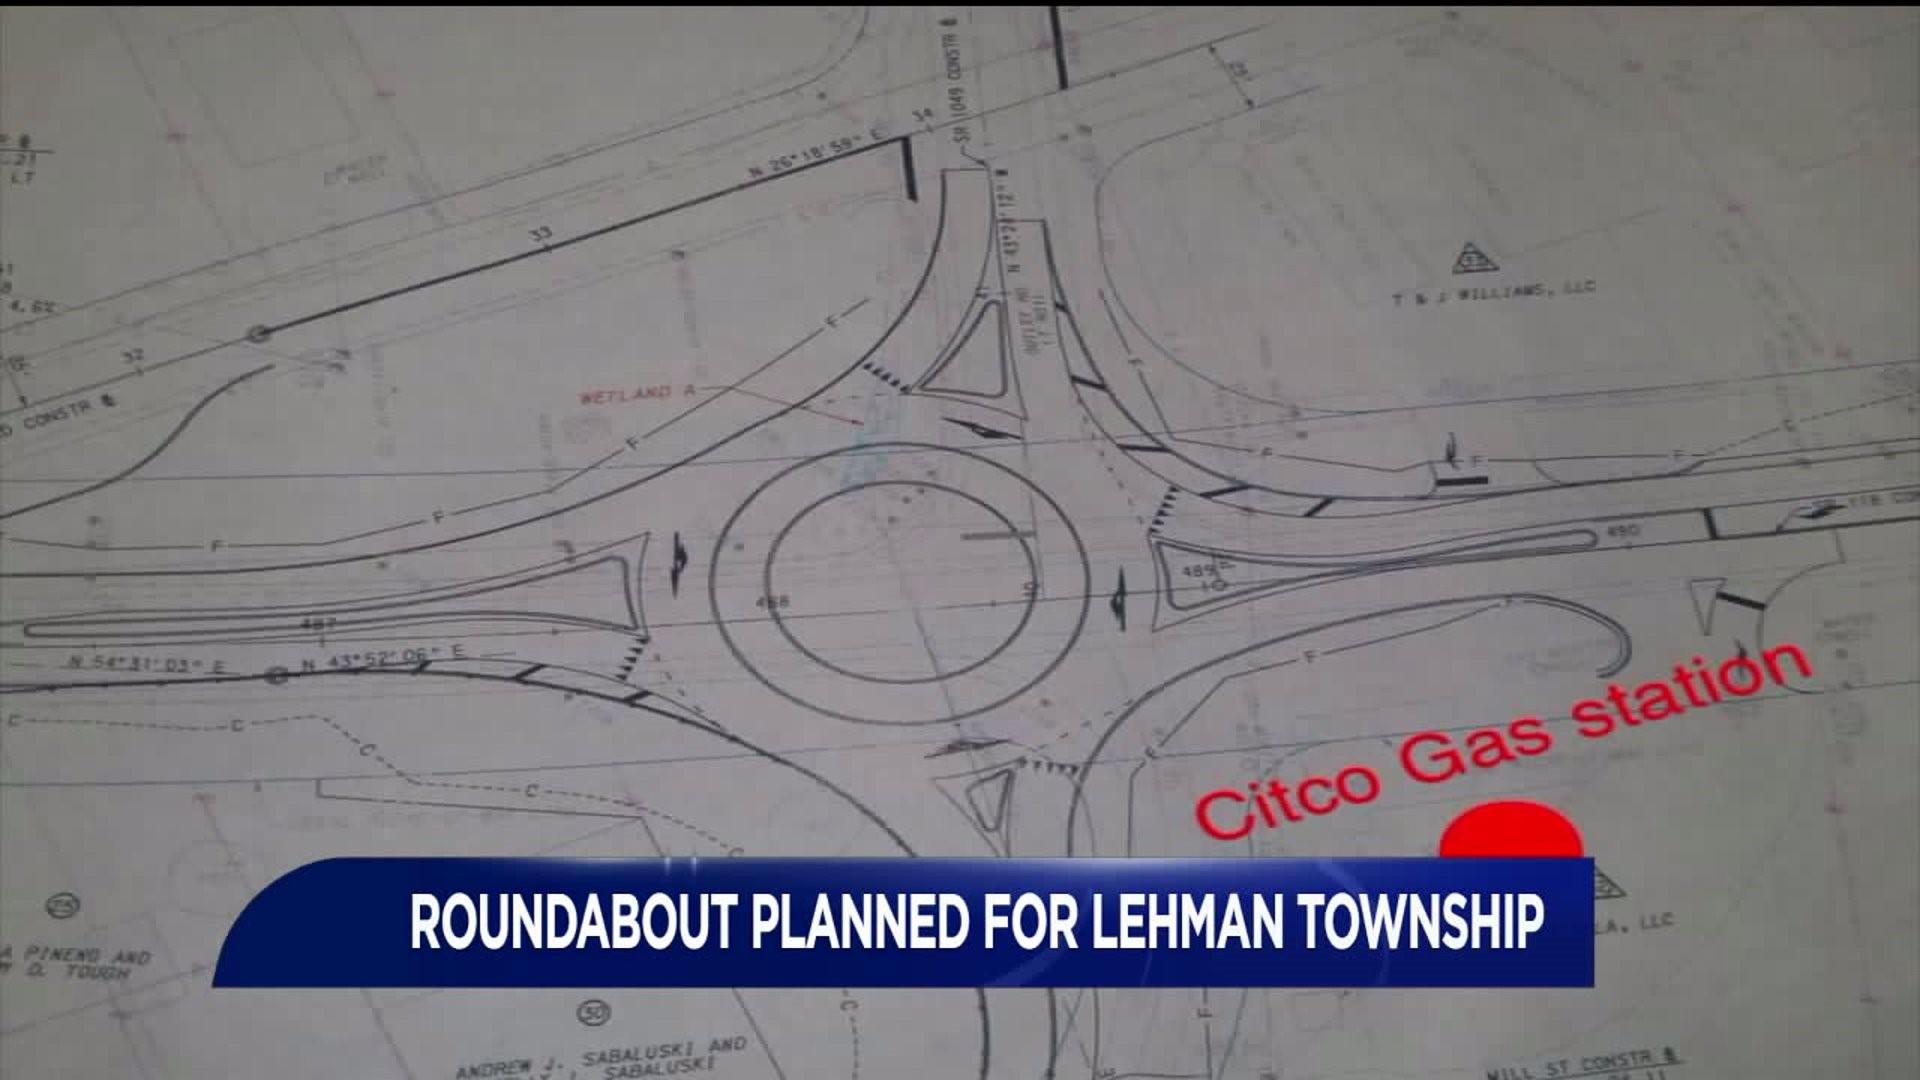 Roundabout Planned for Lehman Township